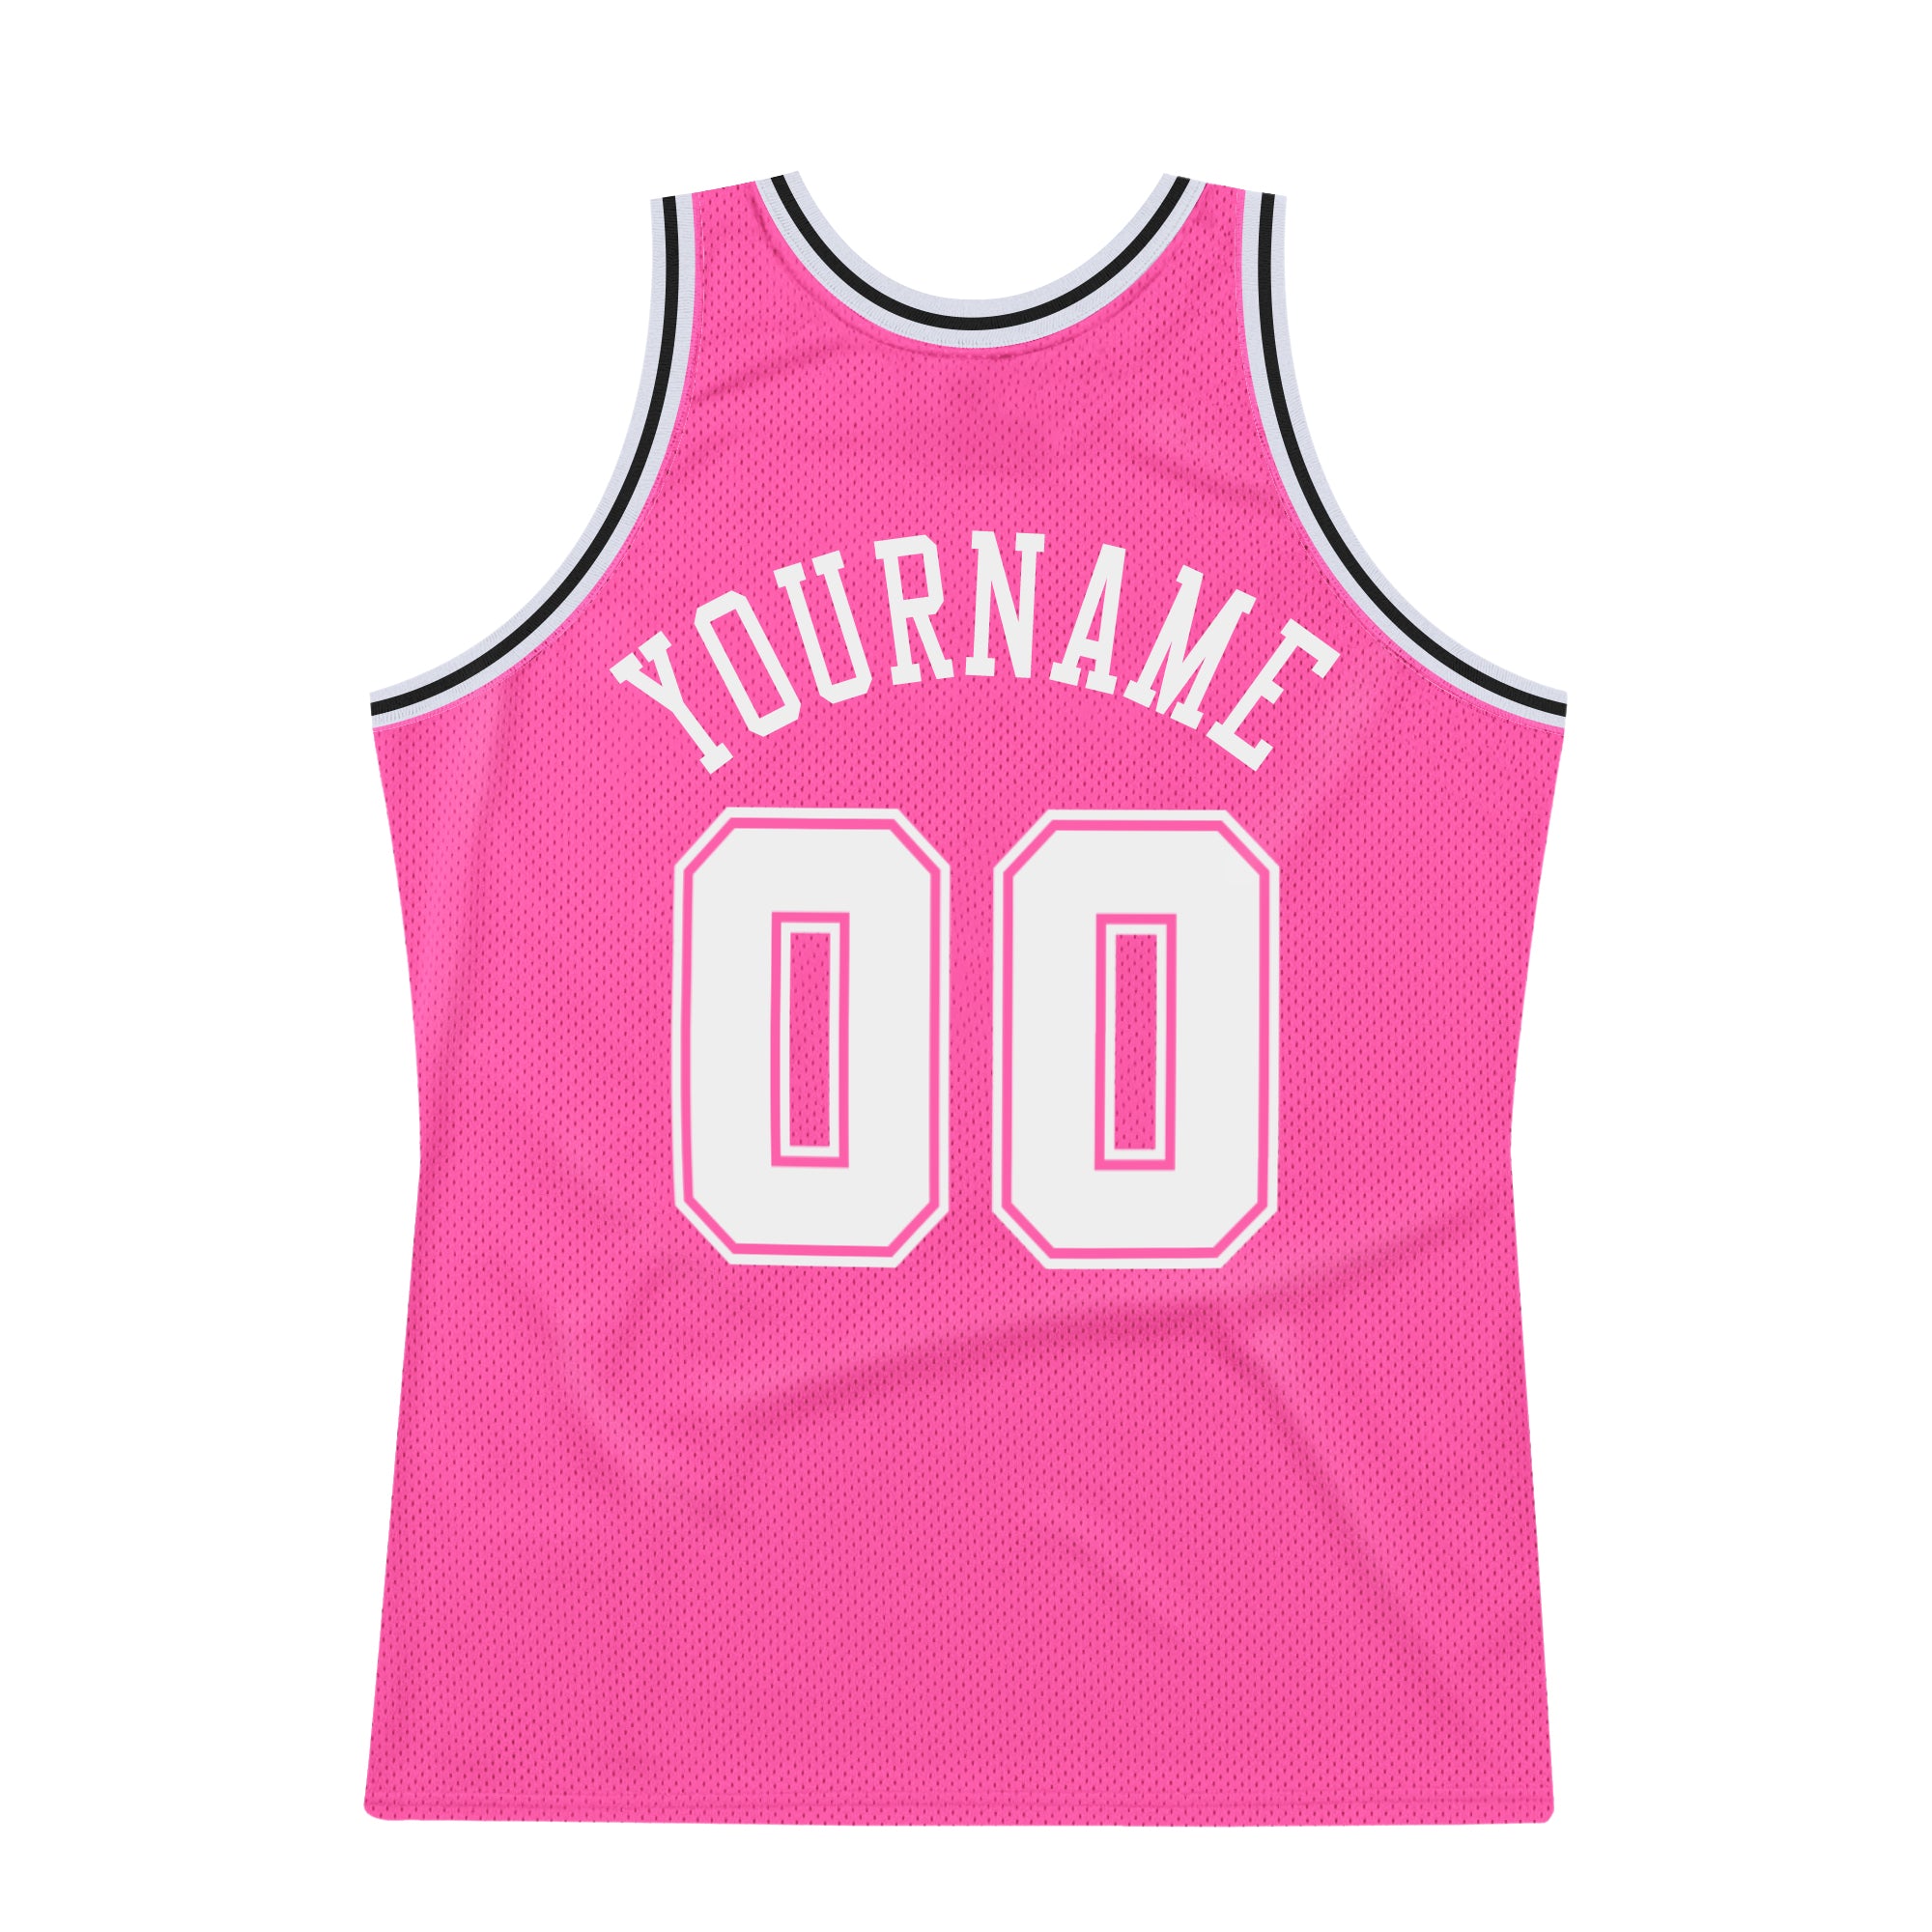 Rioofinx Men's 3 Pink Basketball Jersey Fashion Hip Hop Sports Fan Clothing for Party Vest White Black Pink S-3xl